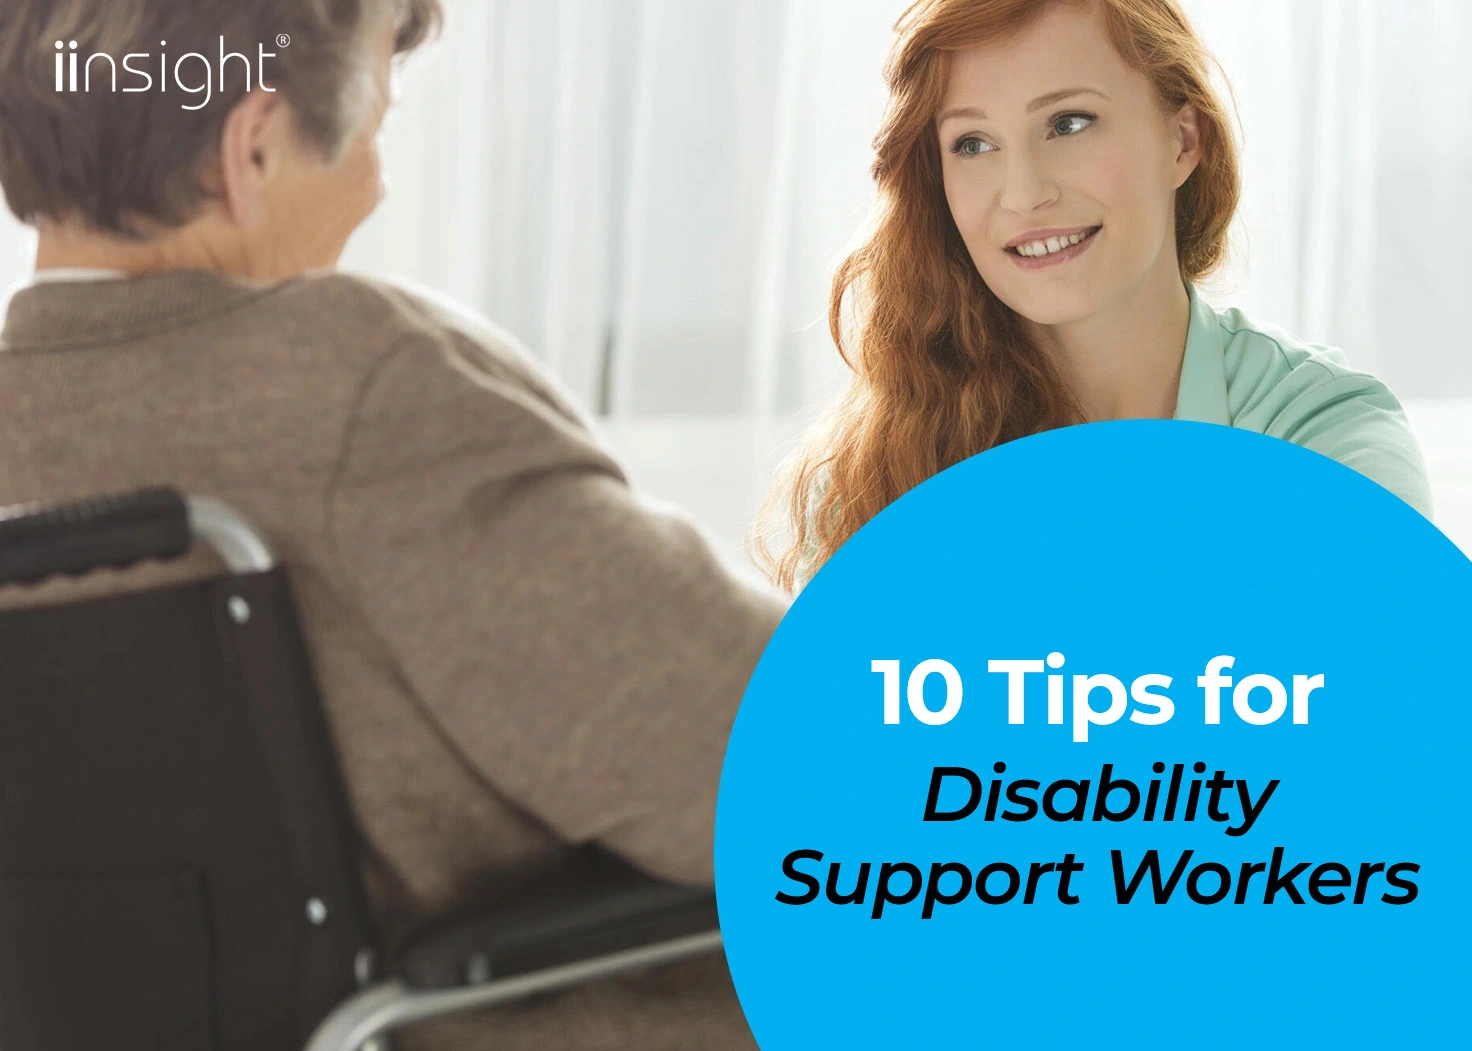 10 Tips for Disability Support Workers